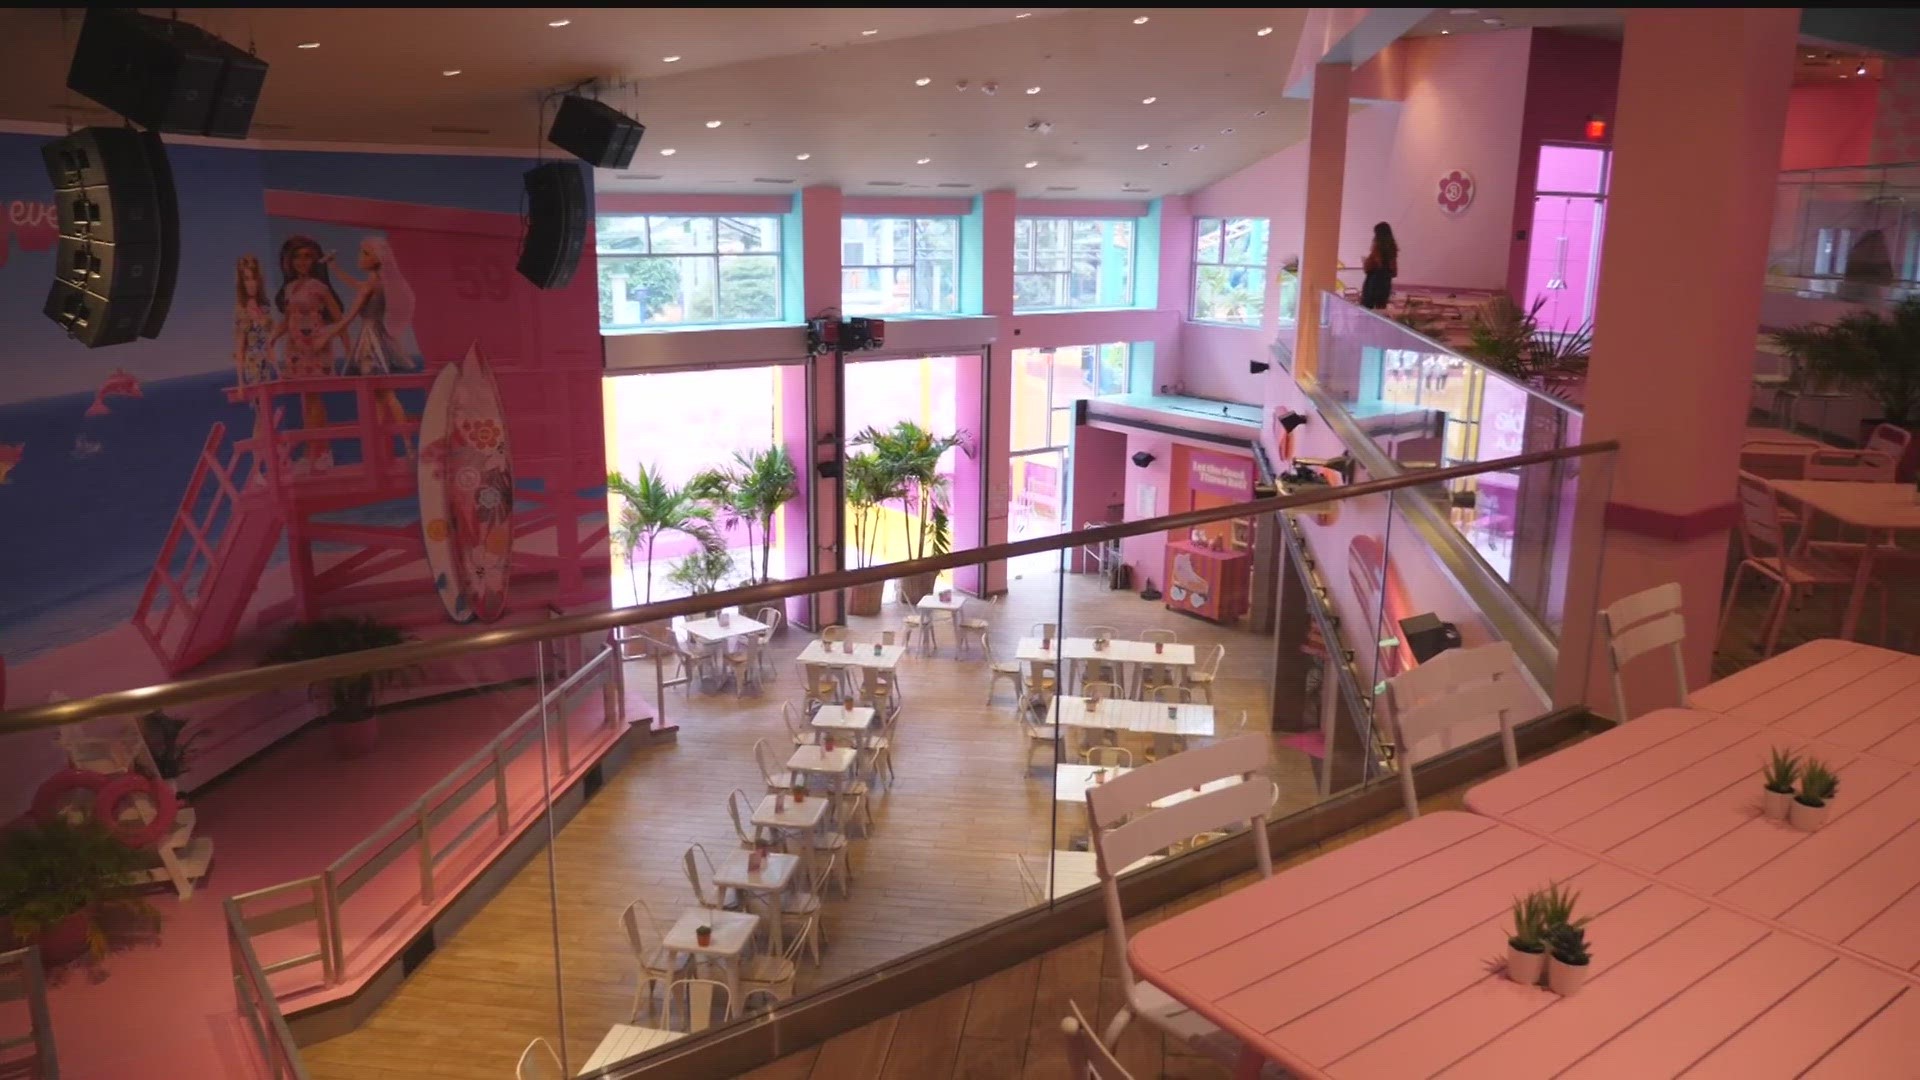 The pink pop-up restaurant with beachy décor will be open at the Mall of America through Jan. 15.